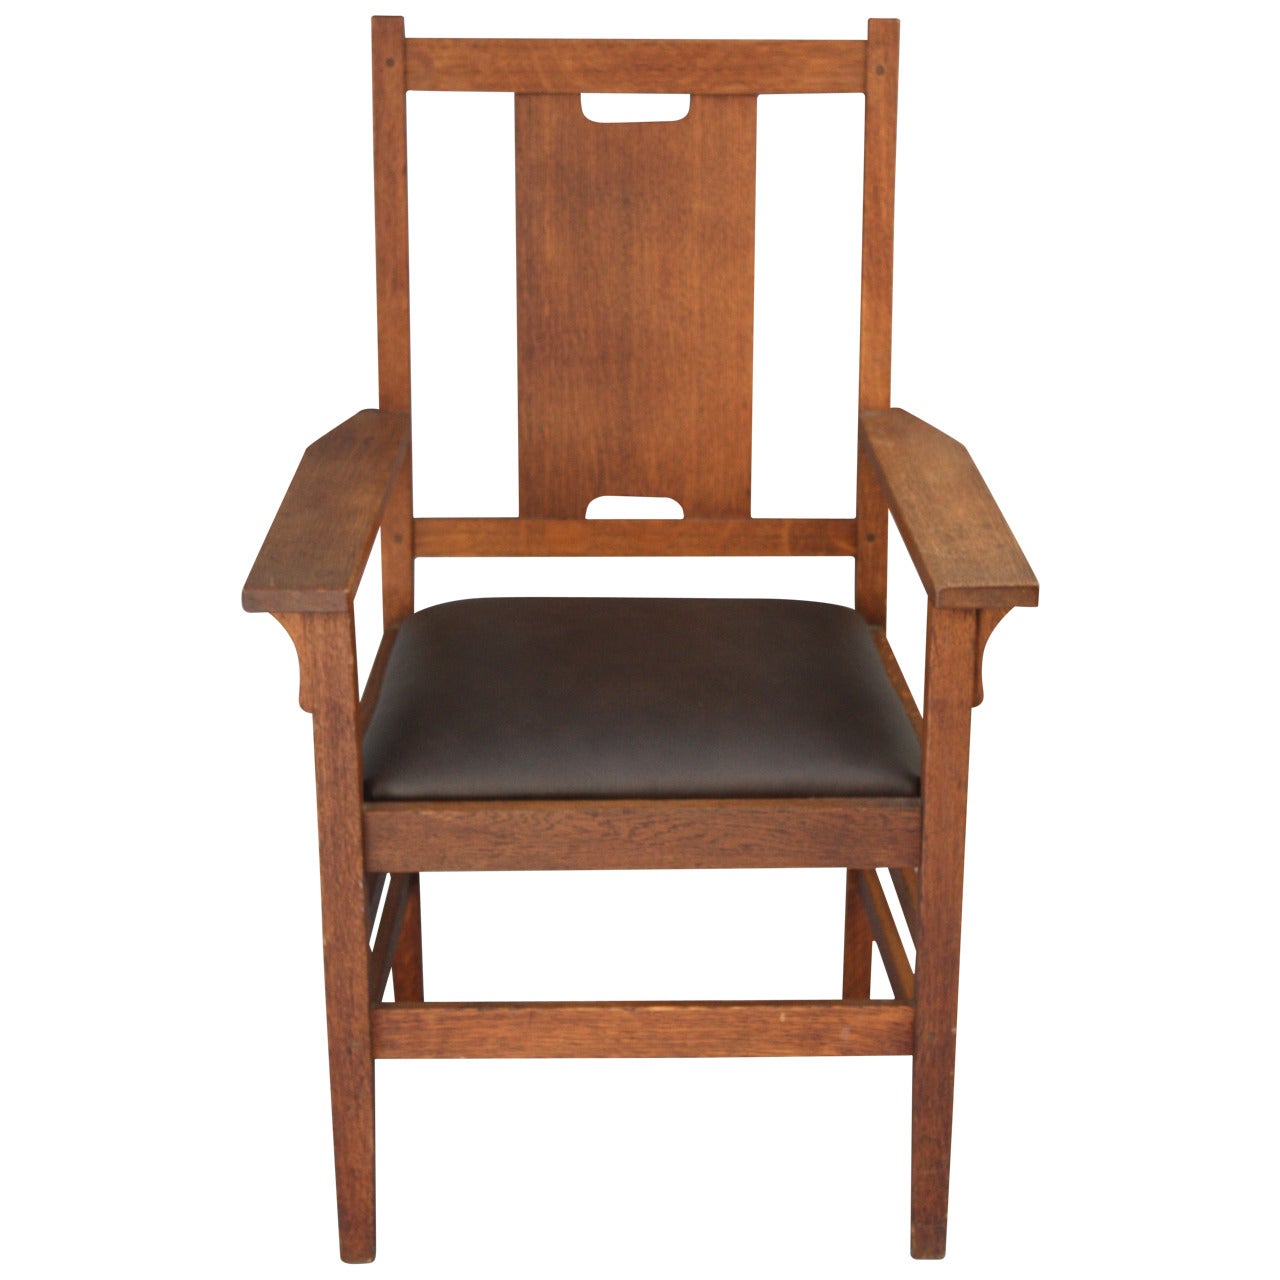 H-Back Arts & Crafts Chair Attributed to Gustav Stickley